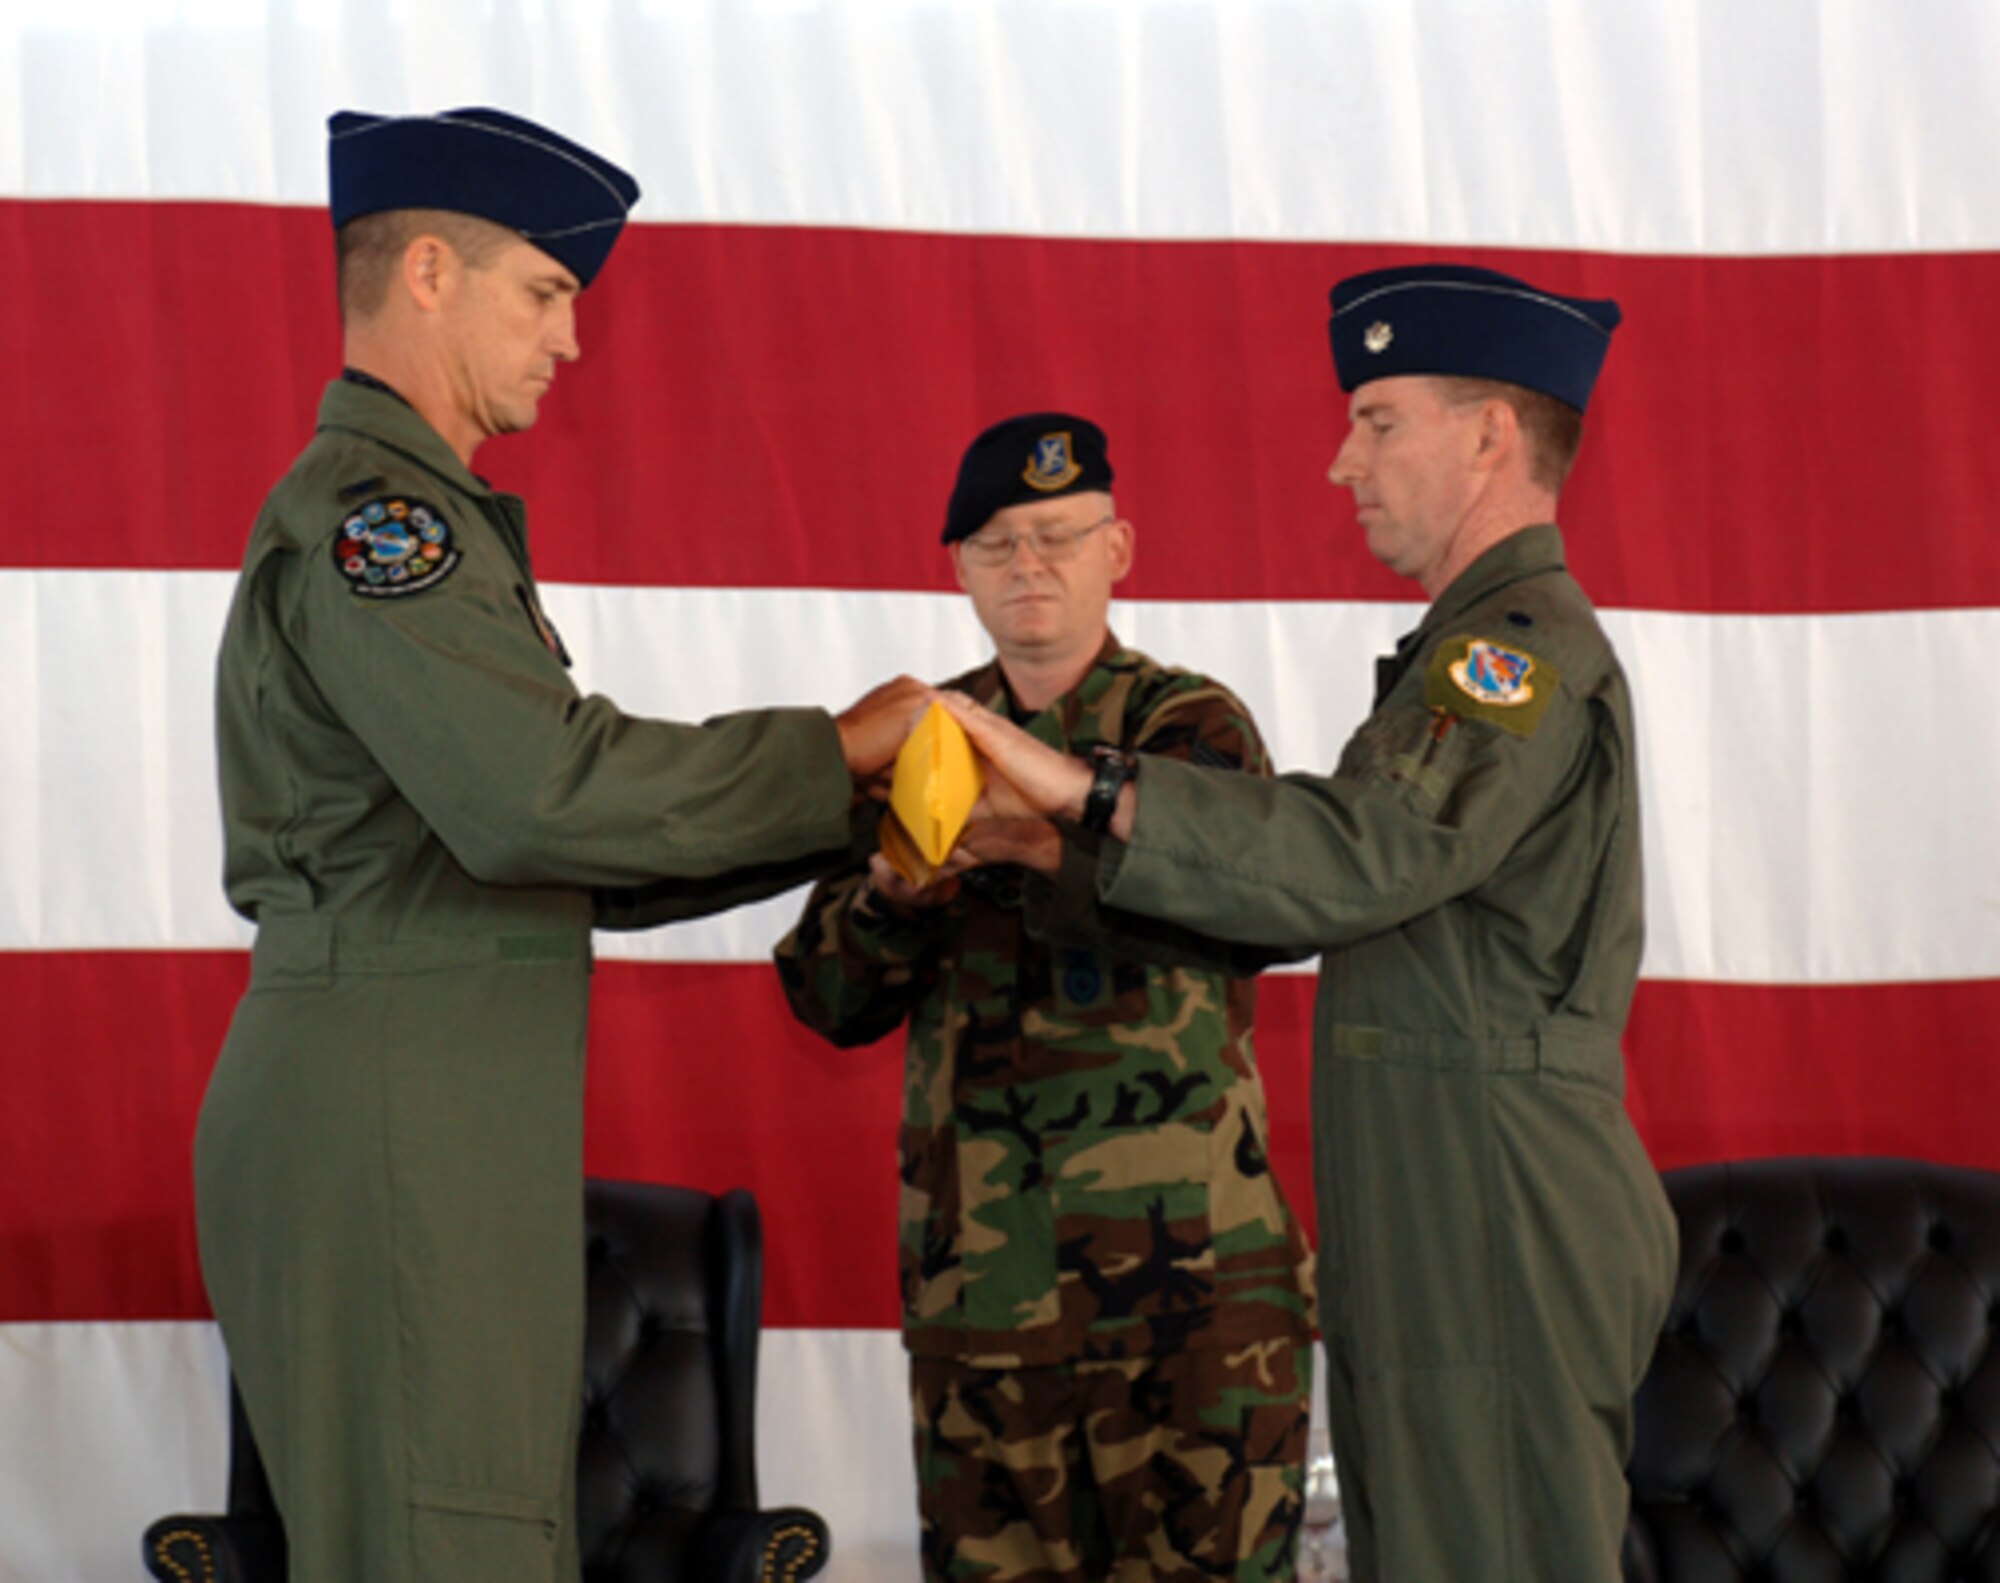 Col. Gregory Neubeck, 53rd Test Evaluation Group commander and Lt. Col. Rick Silong, Detachment 1 commander, wrap up the detachment's guidon in preparation for its retirement during the Sept. 15 ceremony. (Amn. John Strong)